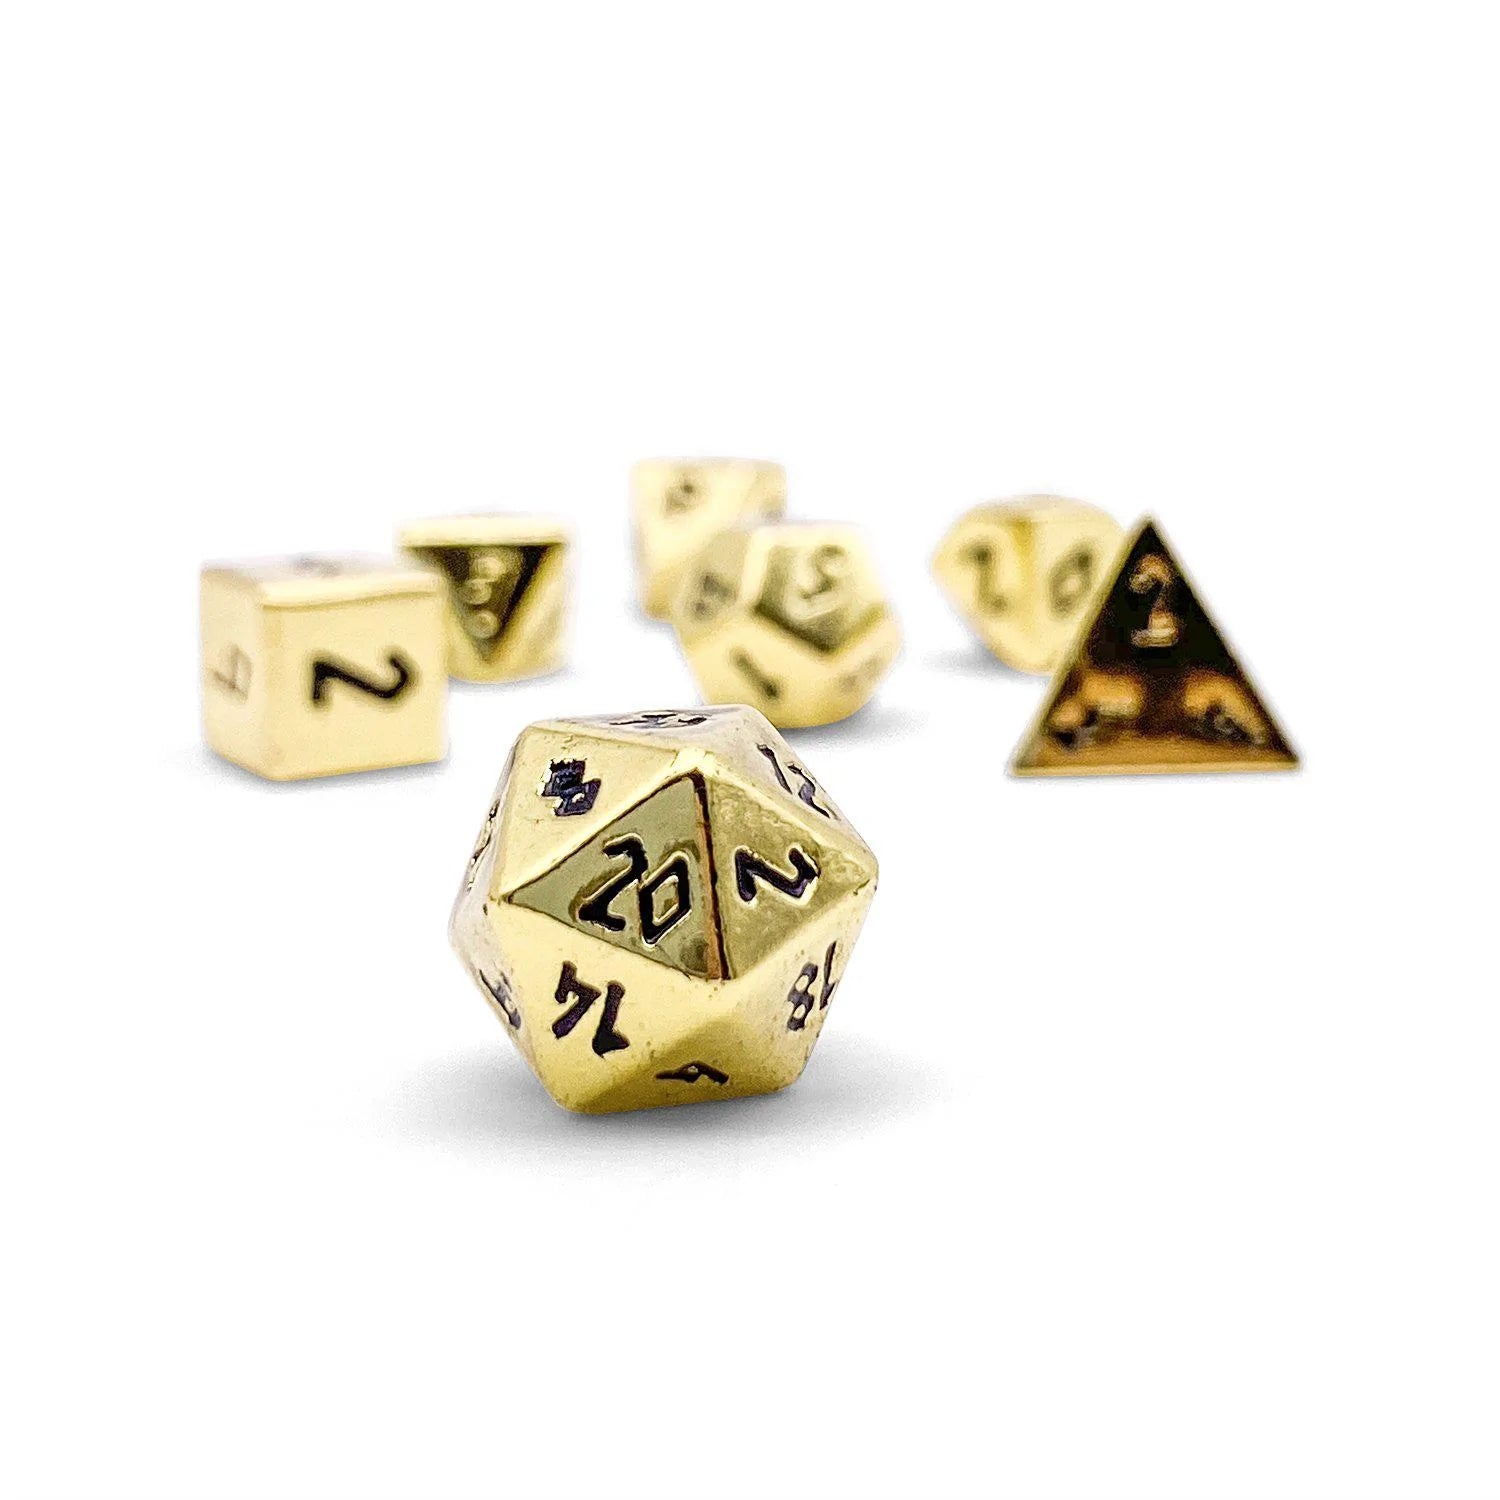 DEAD MAN'S GOLD PEBBLE™ DICE - 10MM ALLOY MINI POLYHEDRAL DICE SET | Gopher Games